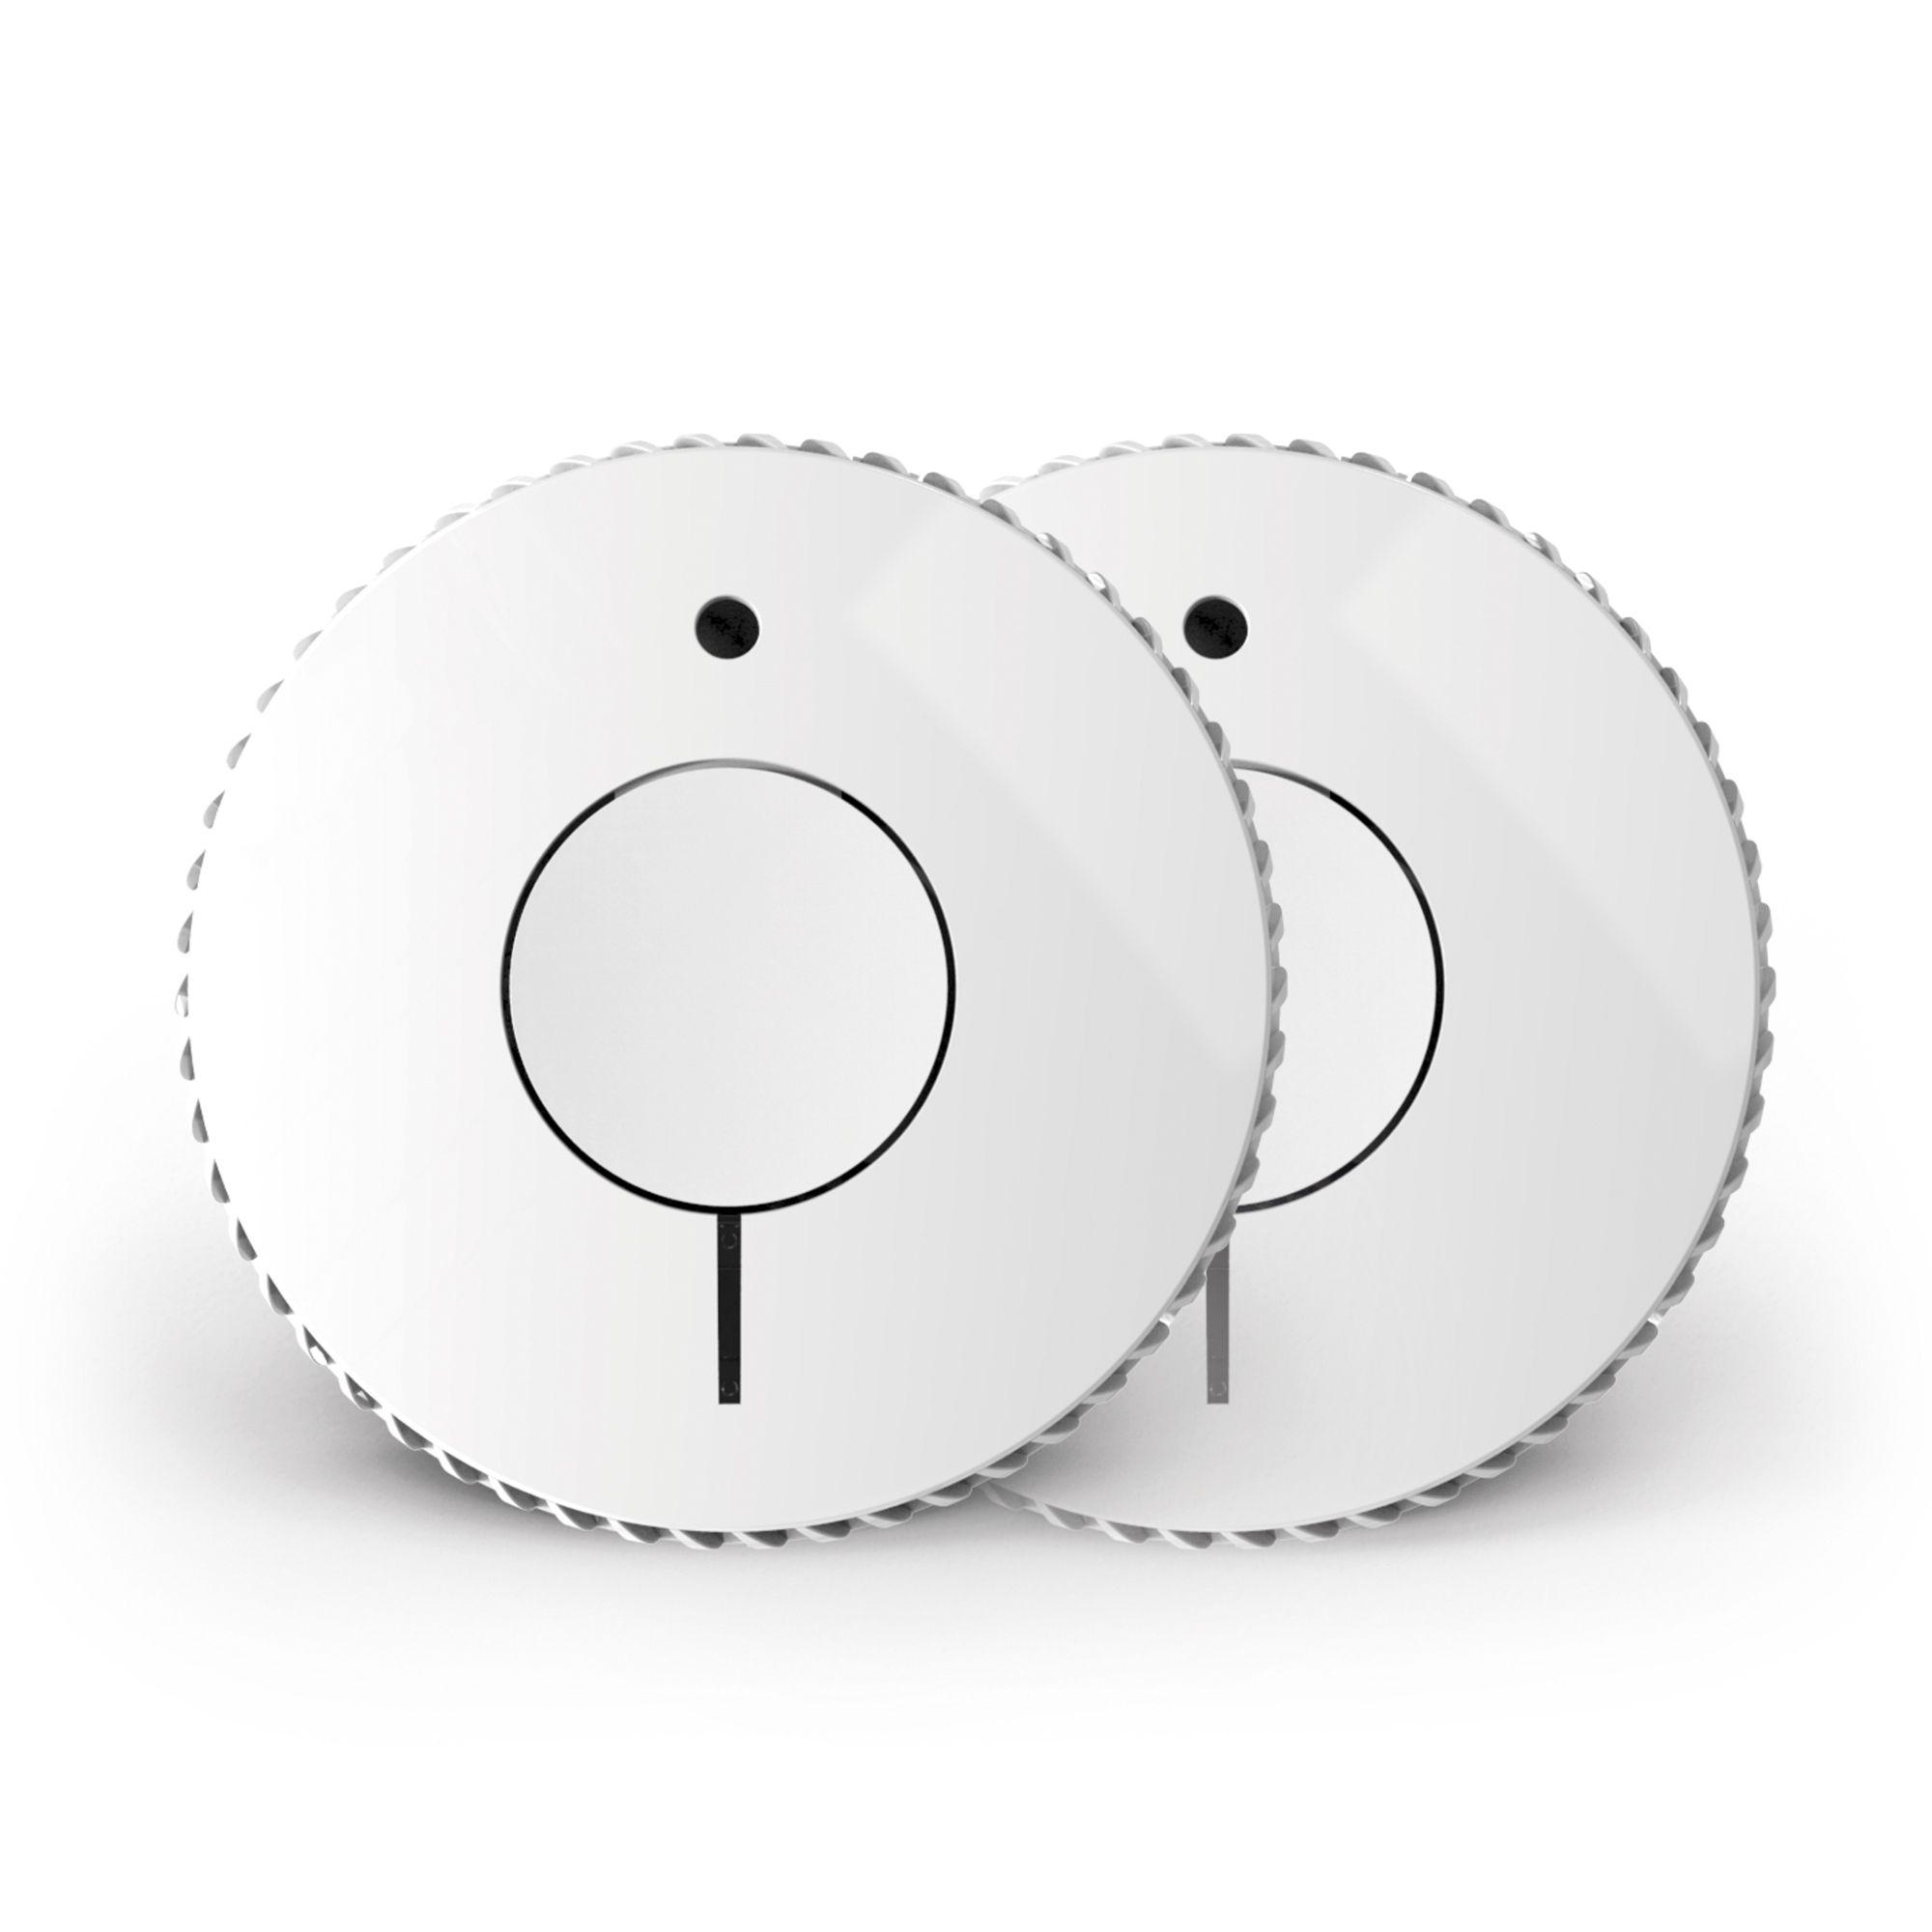 FireAngel FA6620-R-T2 Optical Smoke Alarm with 10-year lifetime battery, Pack of 2